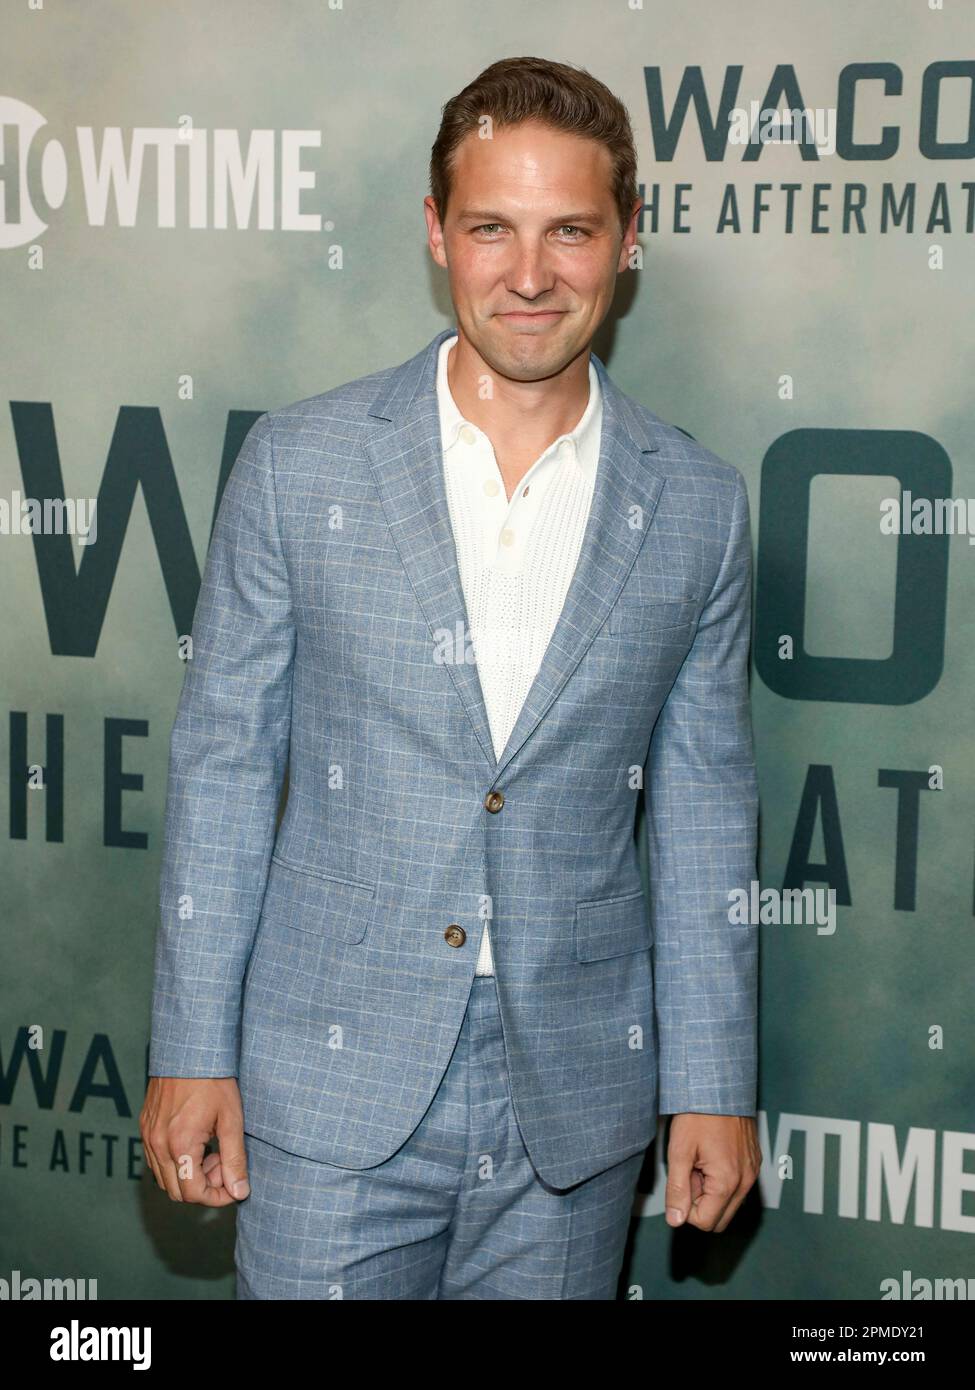 Actor Michael Cassidy attends the Showtime premiere of "Waco: The Aftermath" at the Crosby Street Hotel on Wednesday, April 12, 2023, in New York. (Photo by Andy Kropa/Invision/AP) Stock Photo